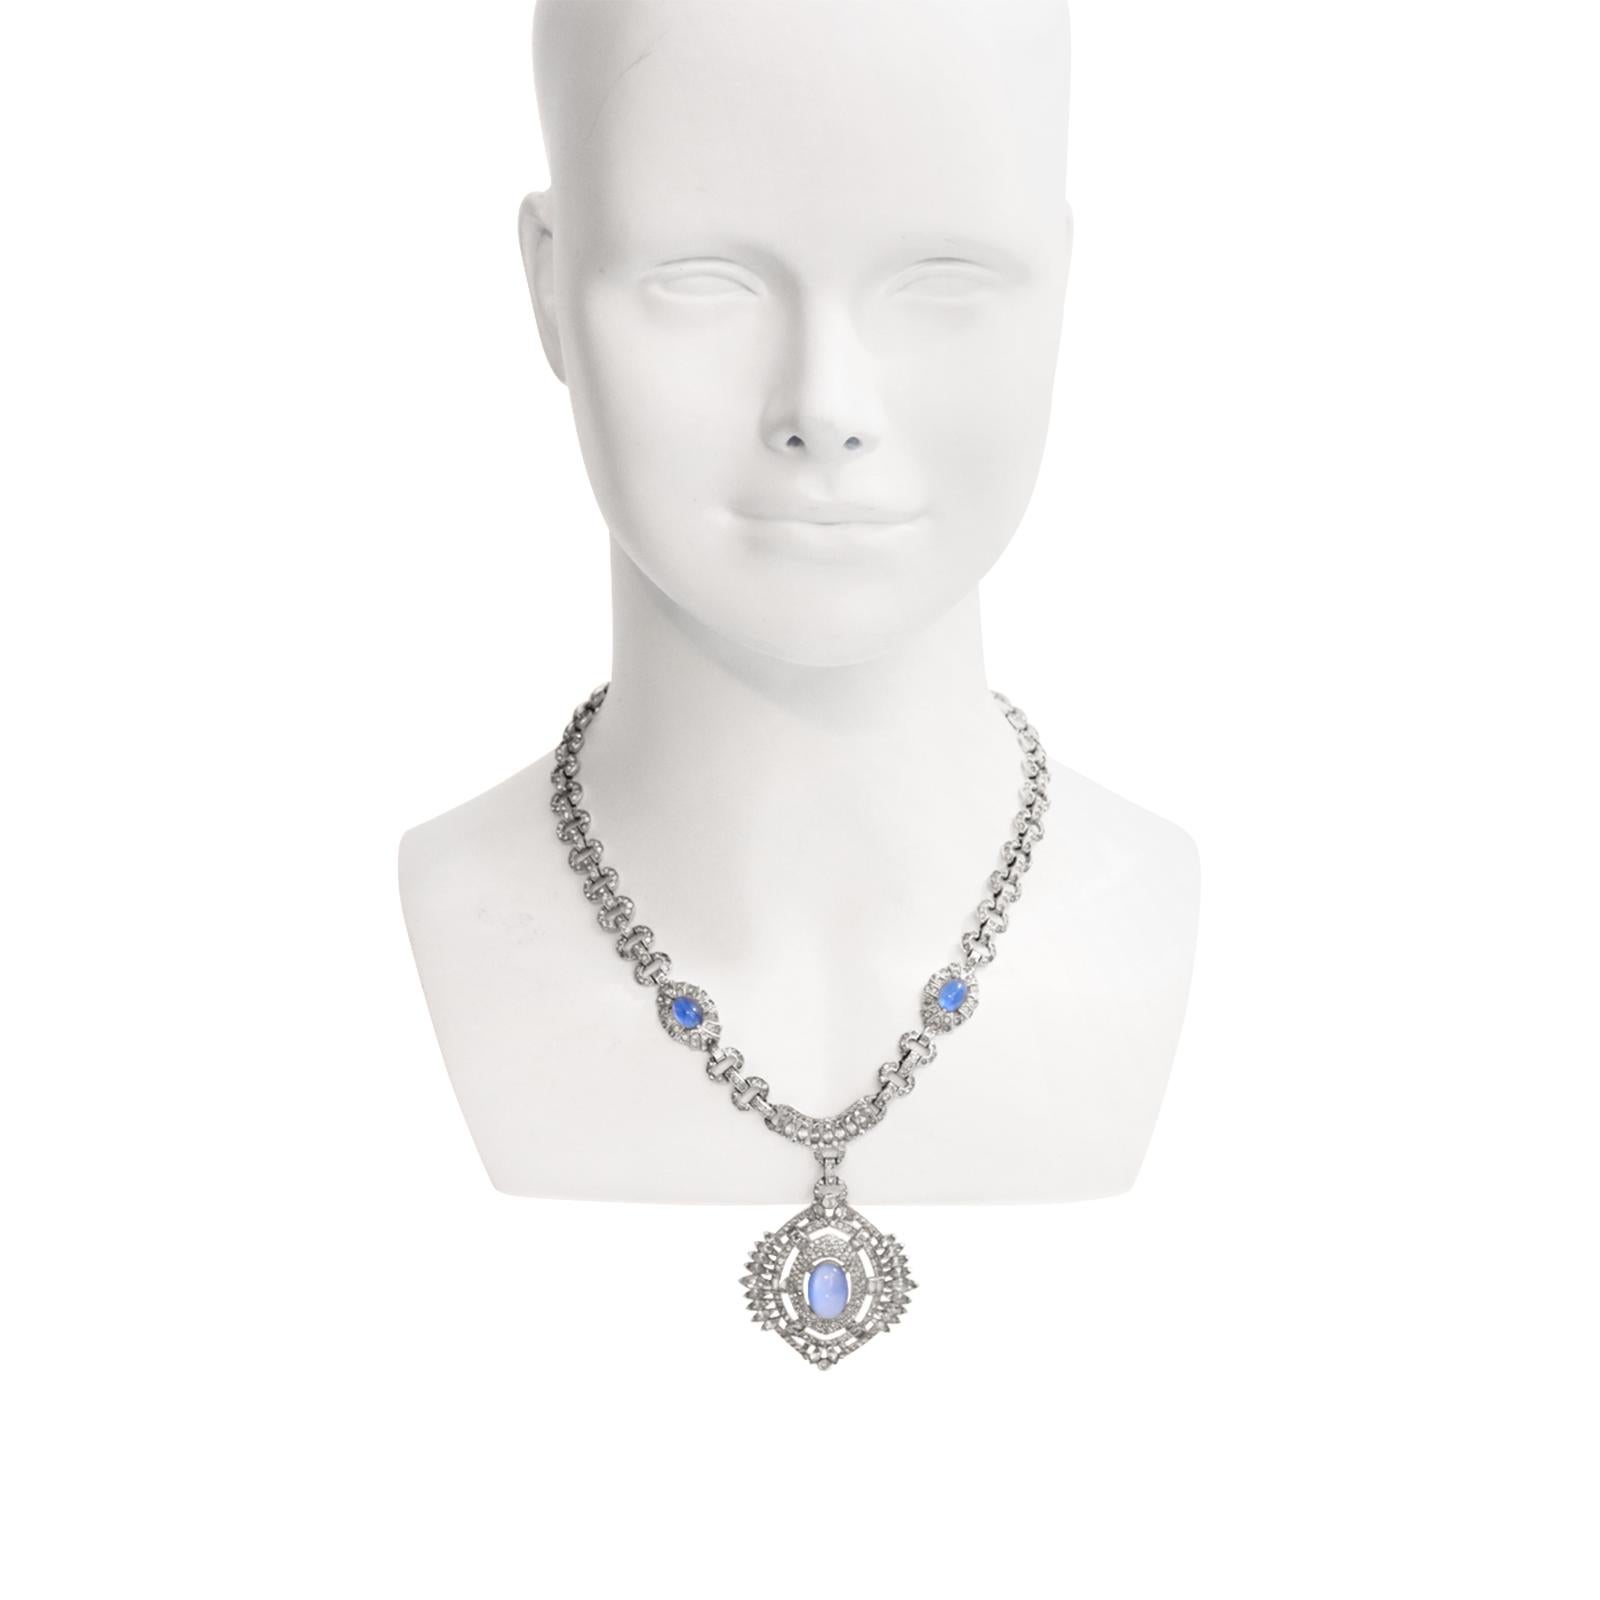 Vintage Diamante with Blue Shiny Cabochon Dangling Pendant Necklace, circa 1960s In Good Condition For Sale In New York, NY